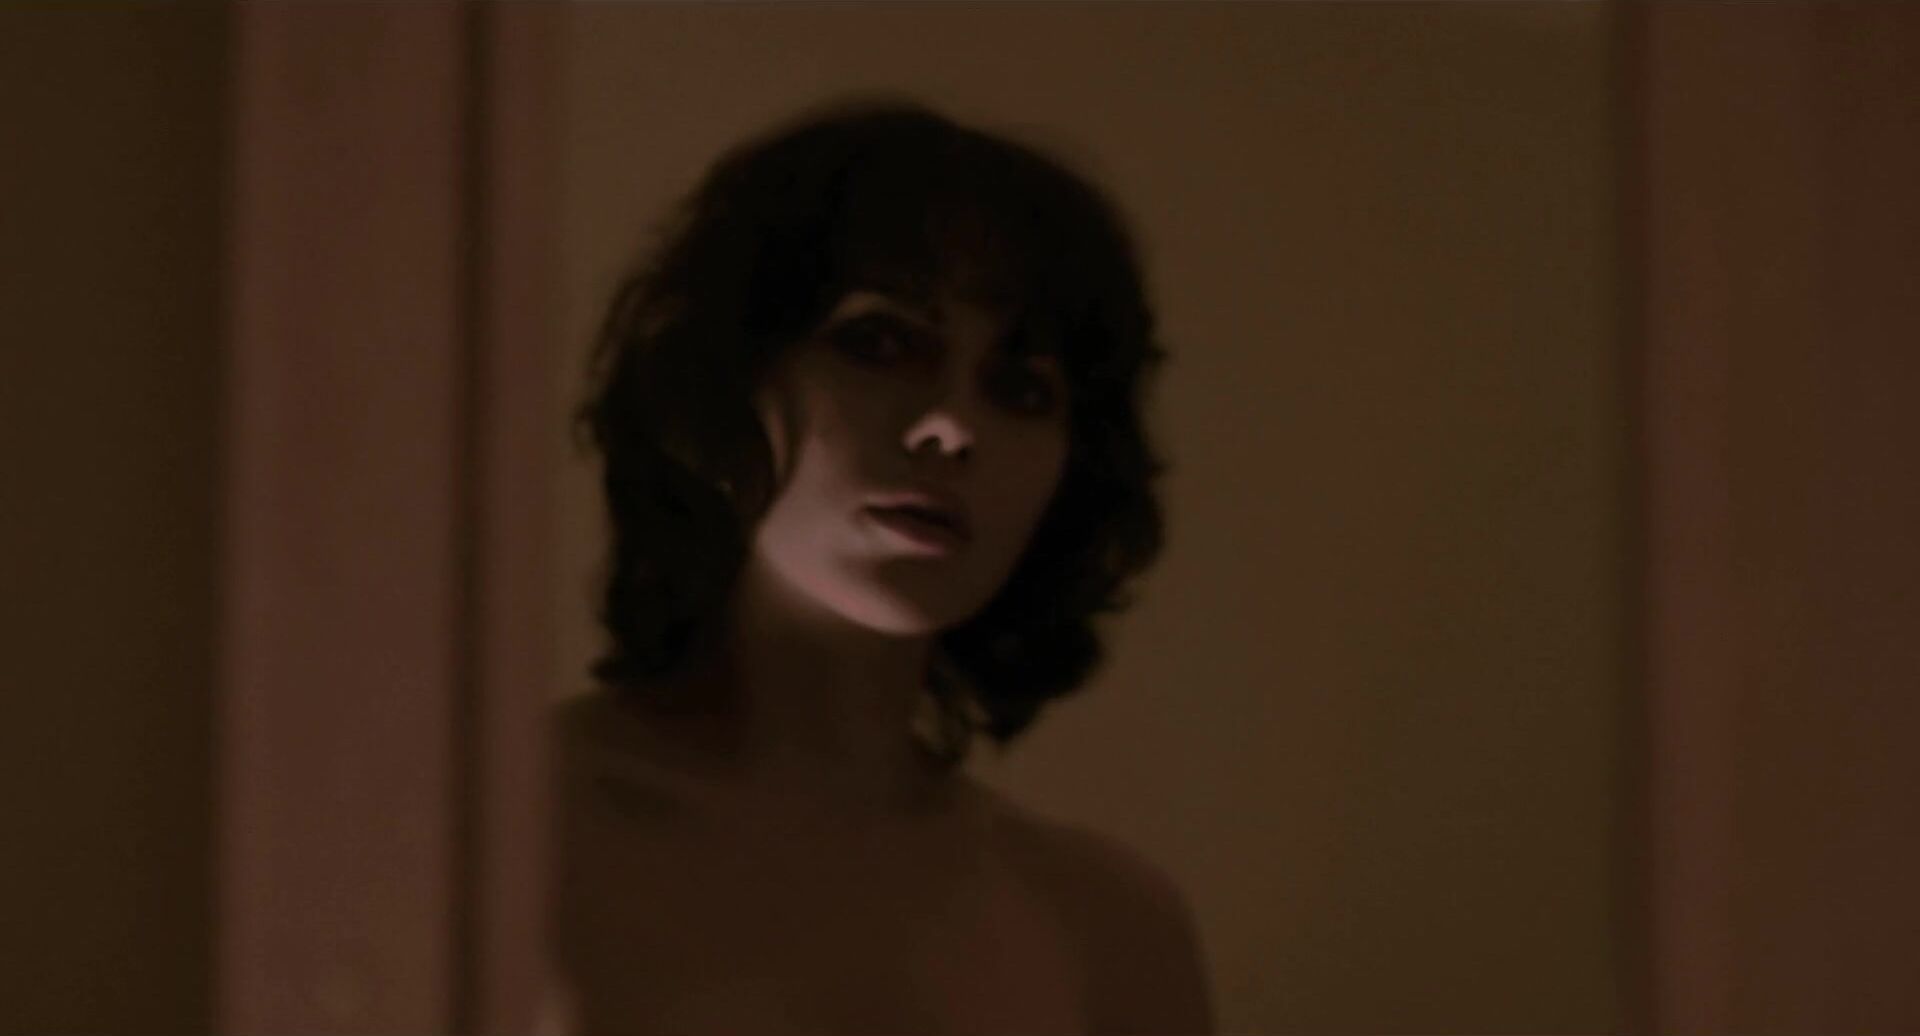 Romance Nude scene from Under The Skin where Scarlett Johansson appears with no clothes Swallow - 1